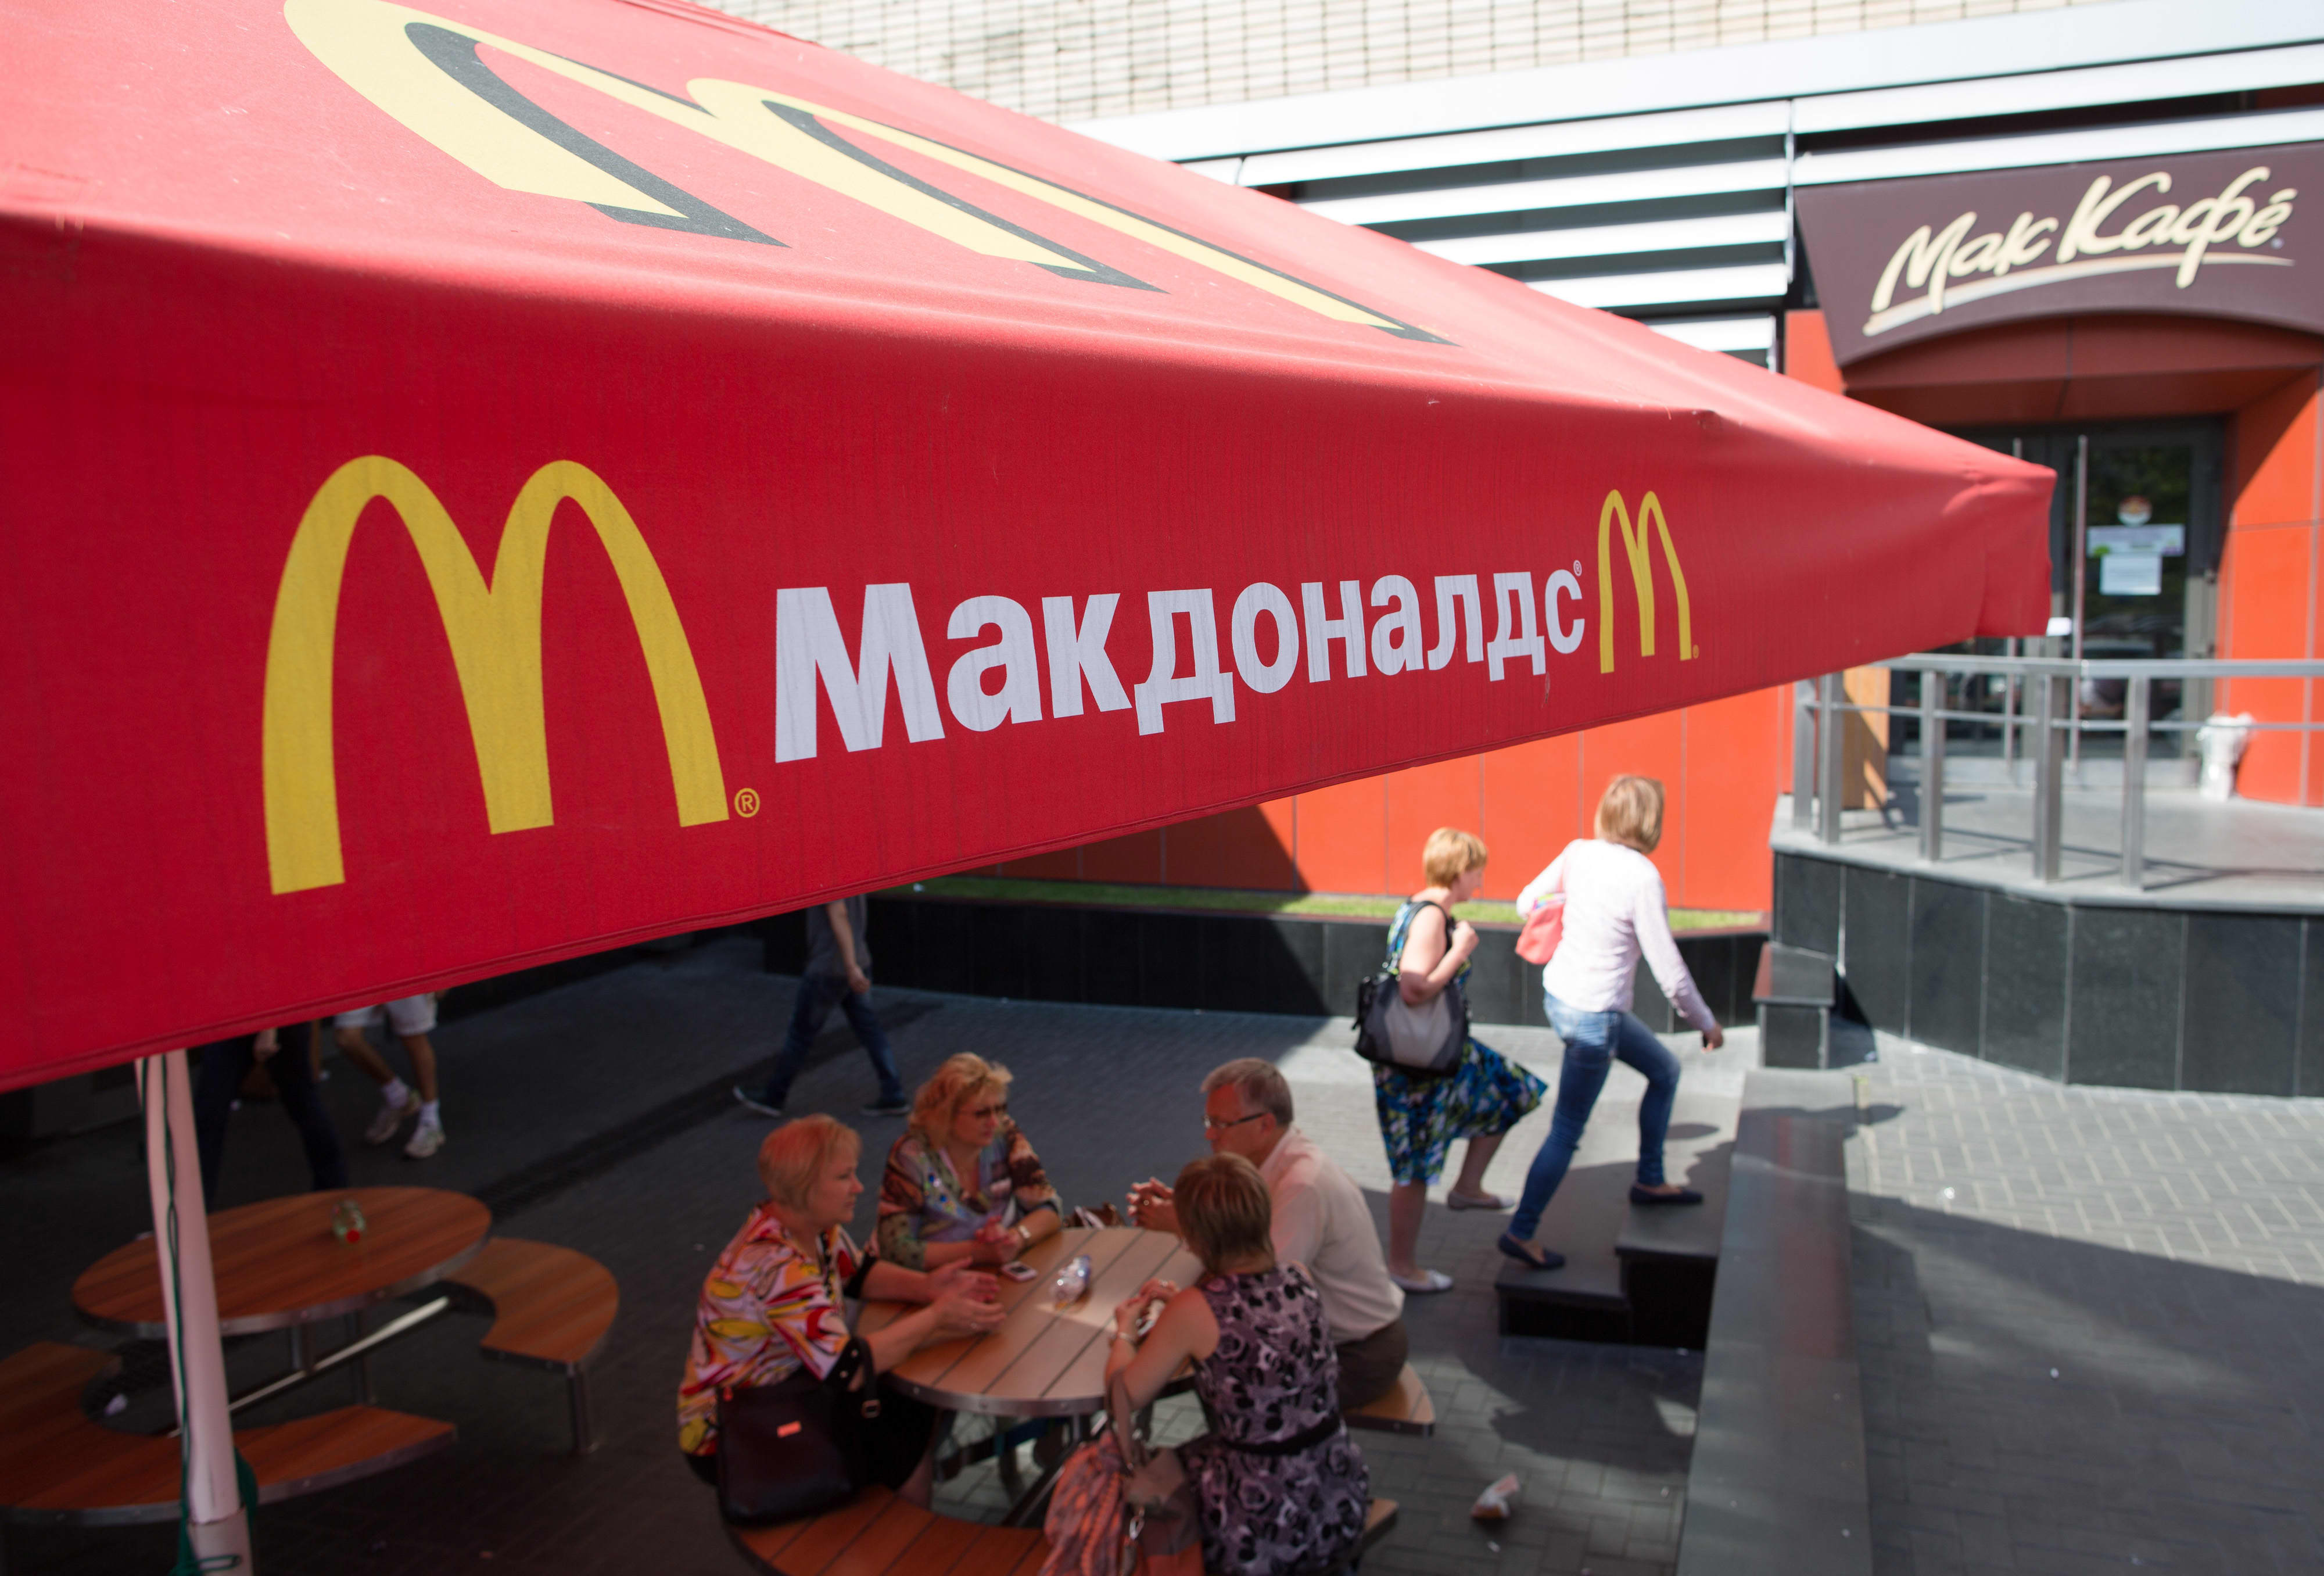 McDonald’s temporarily closes 850 restaurants in Russia, nearly 2 weeks after Putin’s forces invaded Ukraine